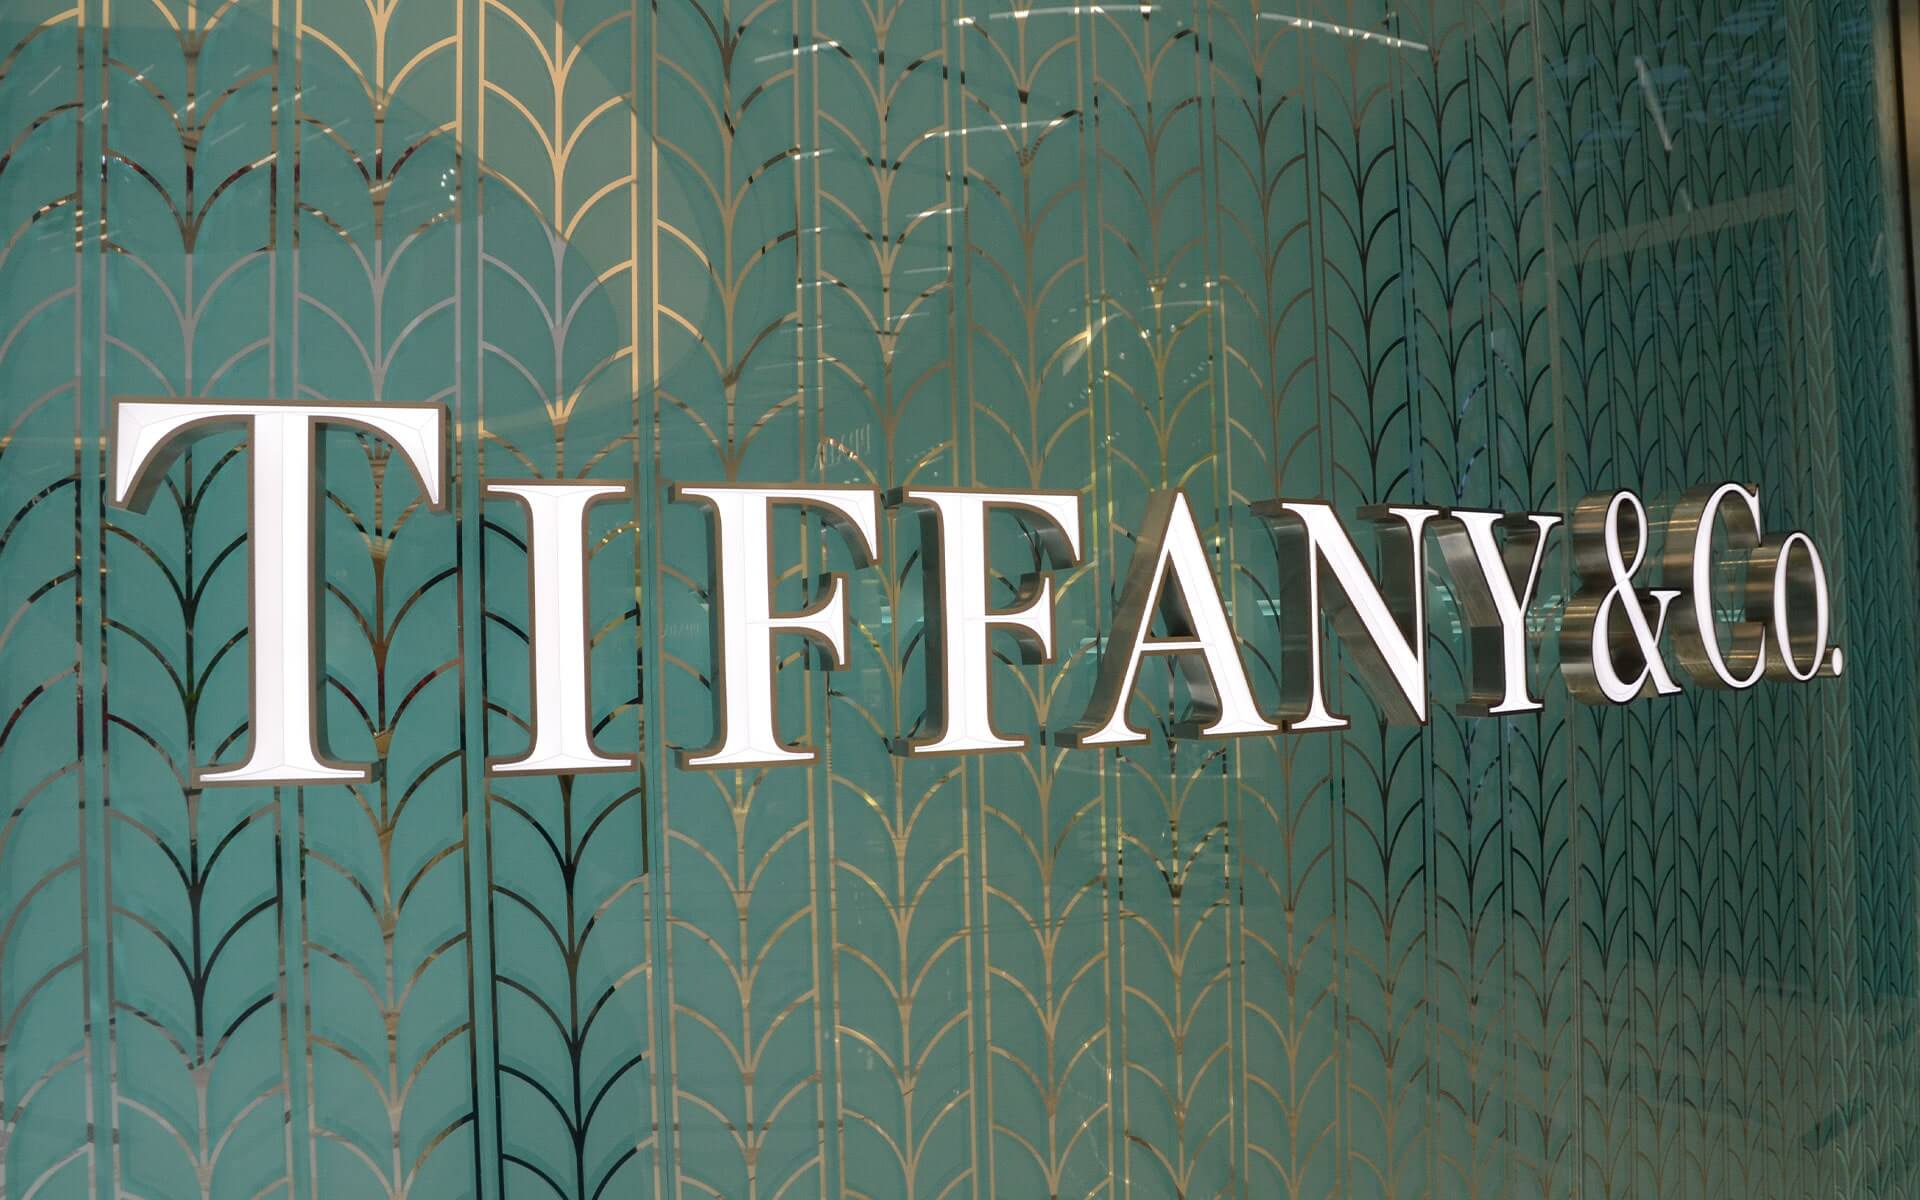 Trim Face-lit Metal Channel Letters for Tiffany & Co.